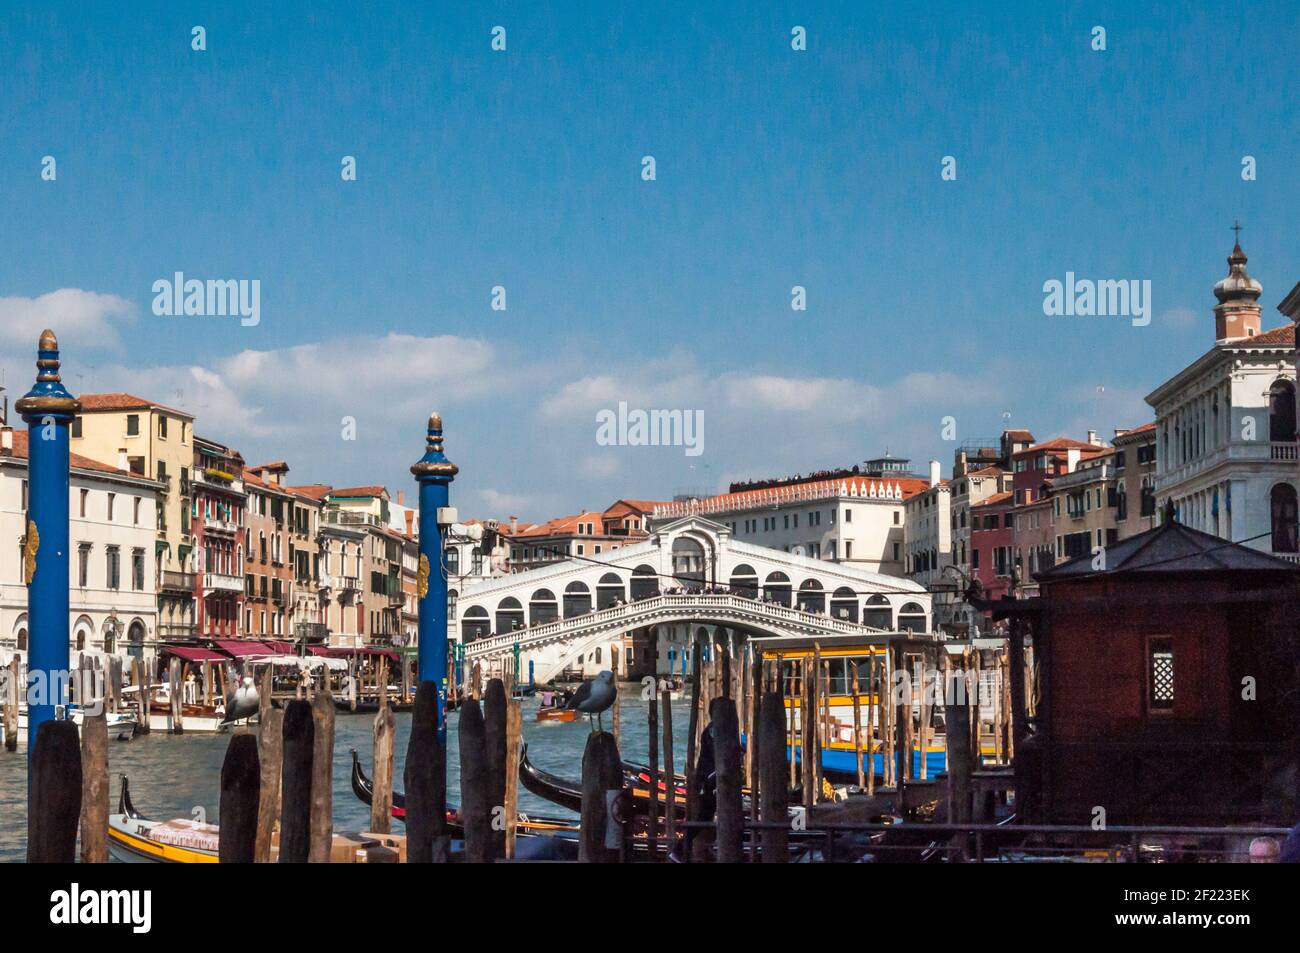 Typical scene in Venice. View of a canal lined with old buildings, bridges and gondolas Stock Photo